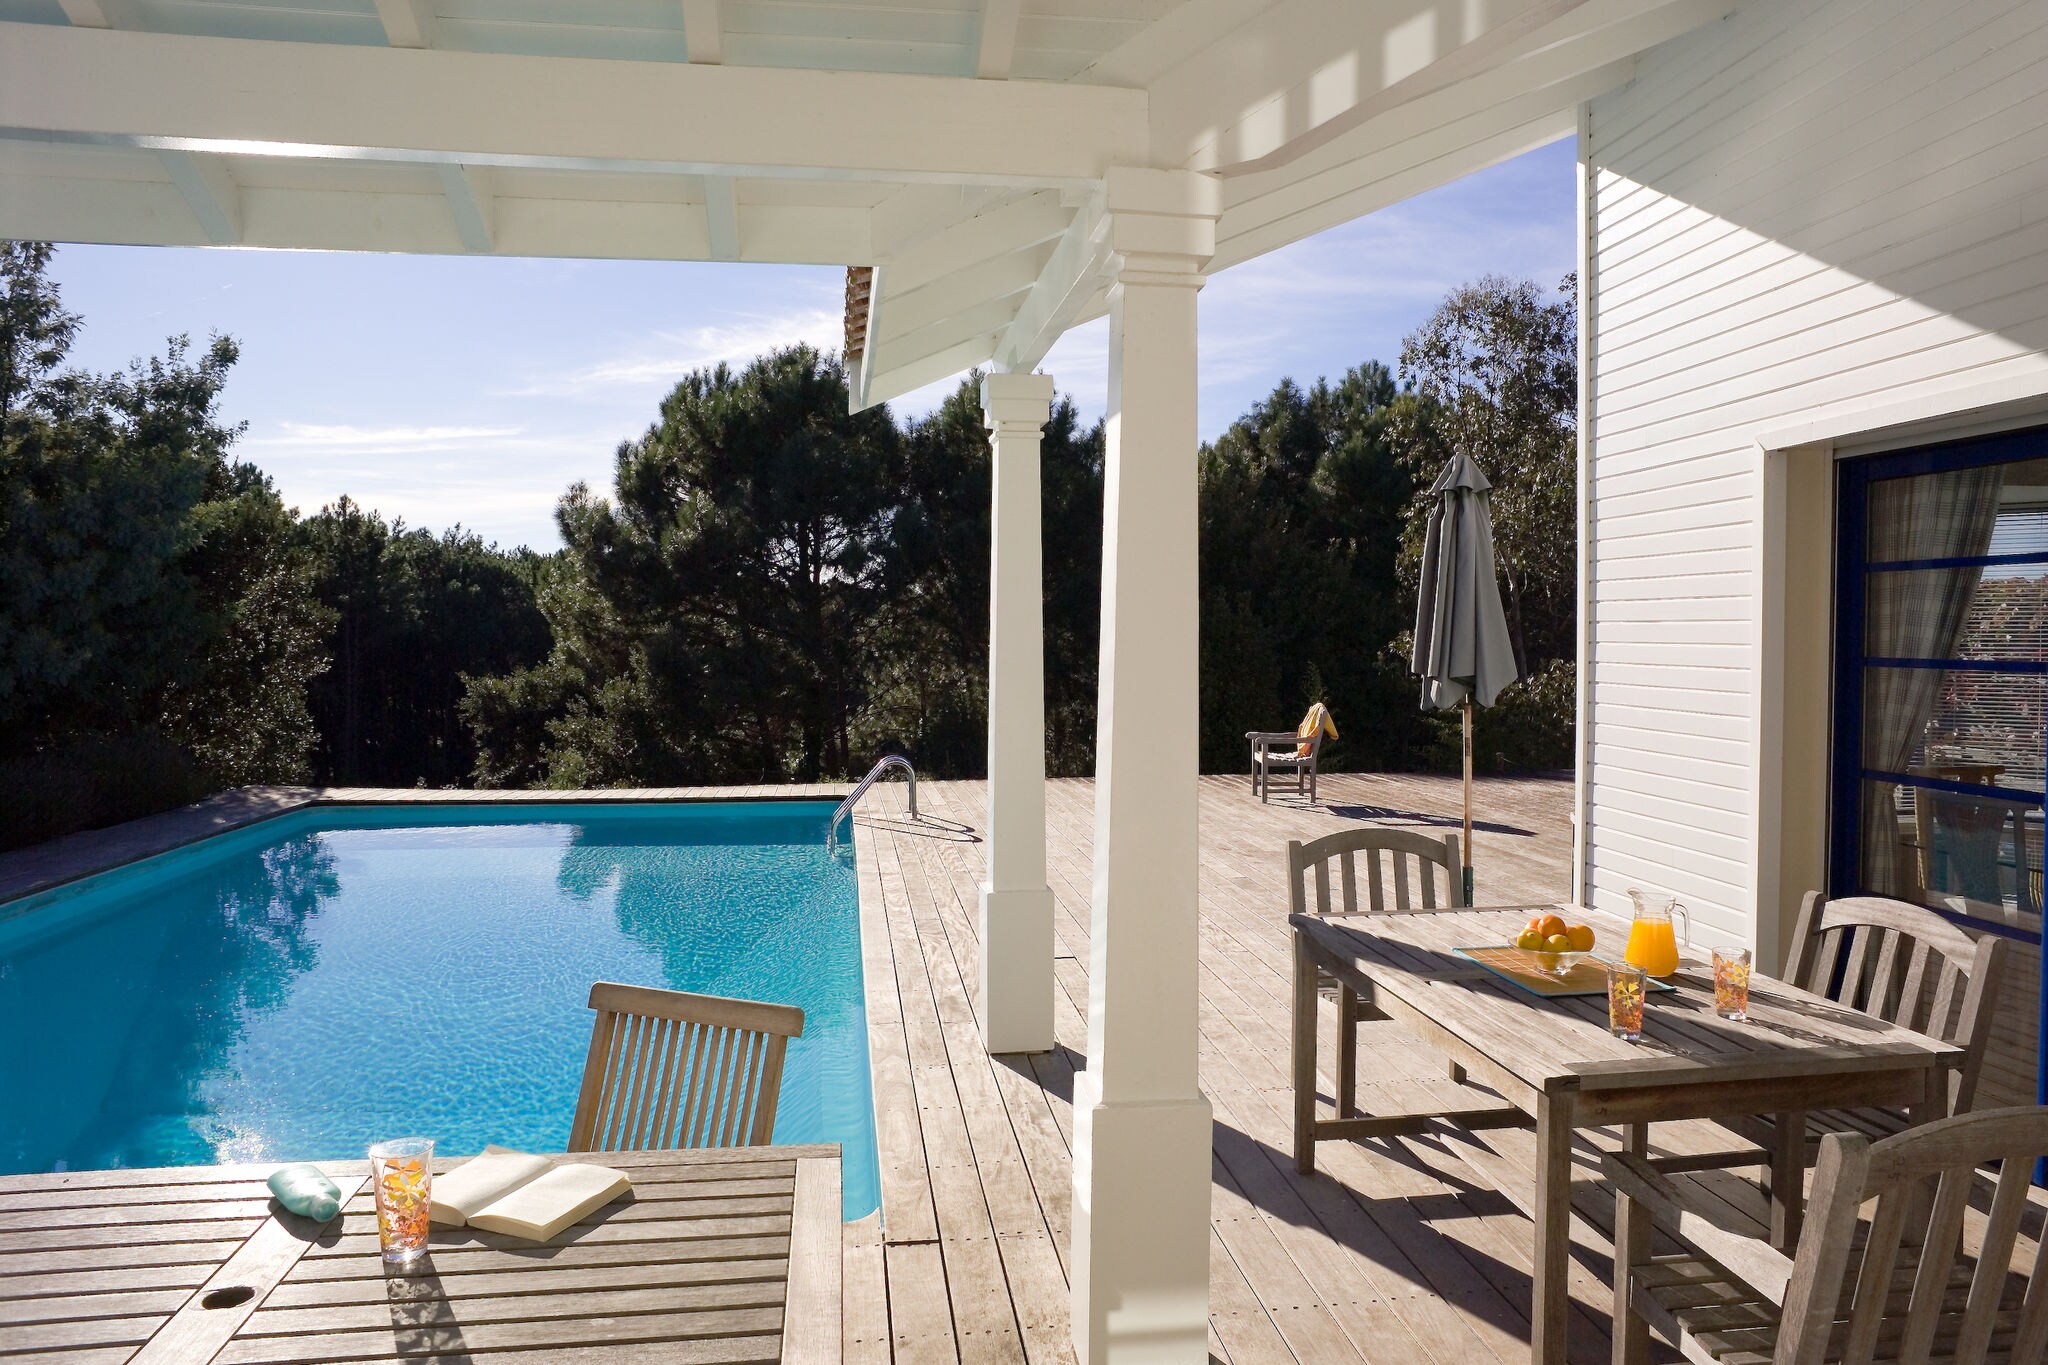 Nice villa with a private pool, just 900 m. from the beach